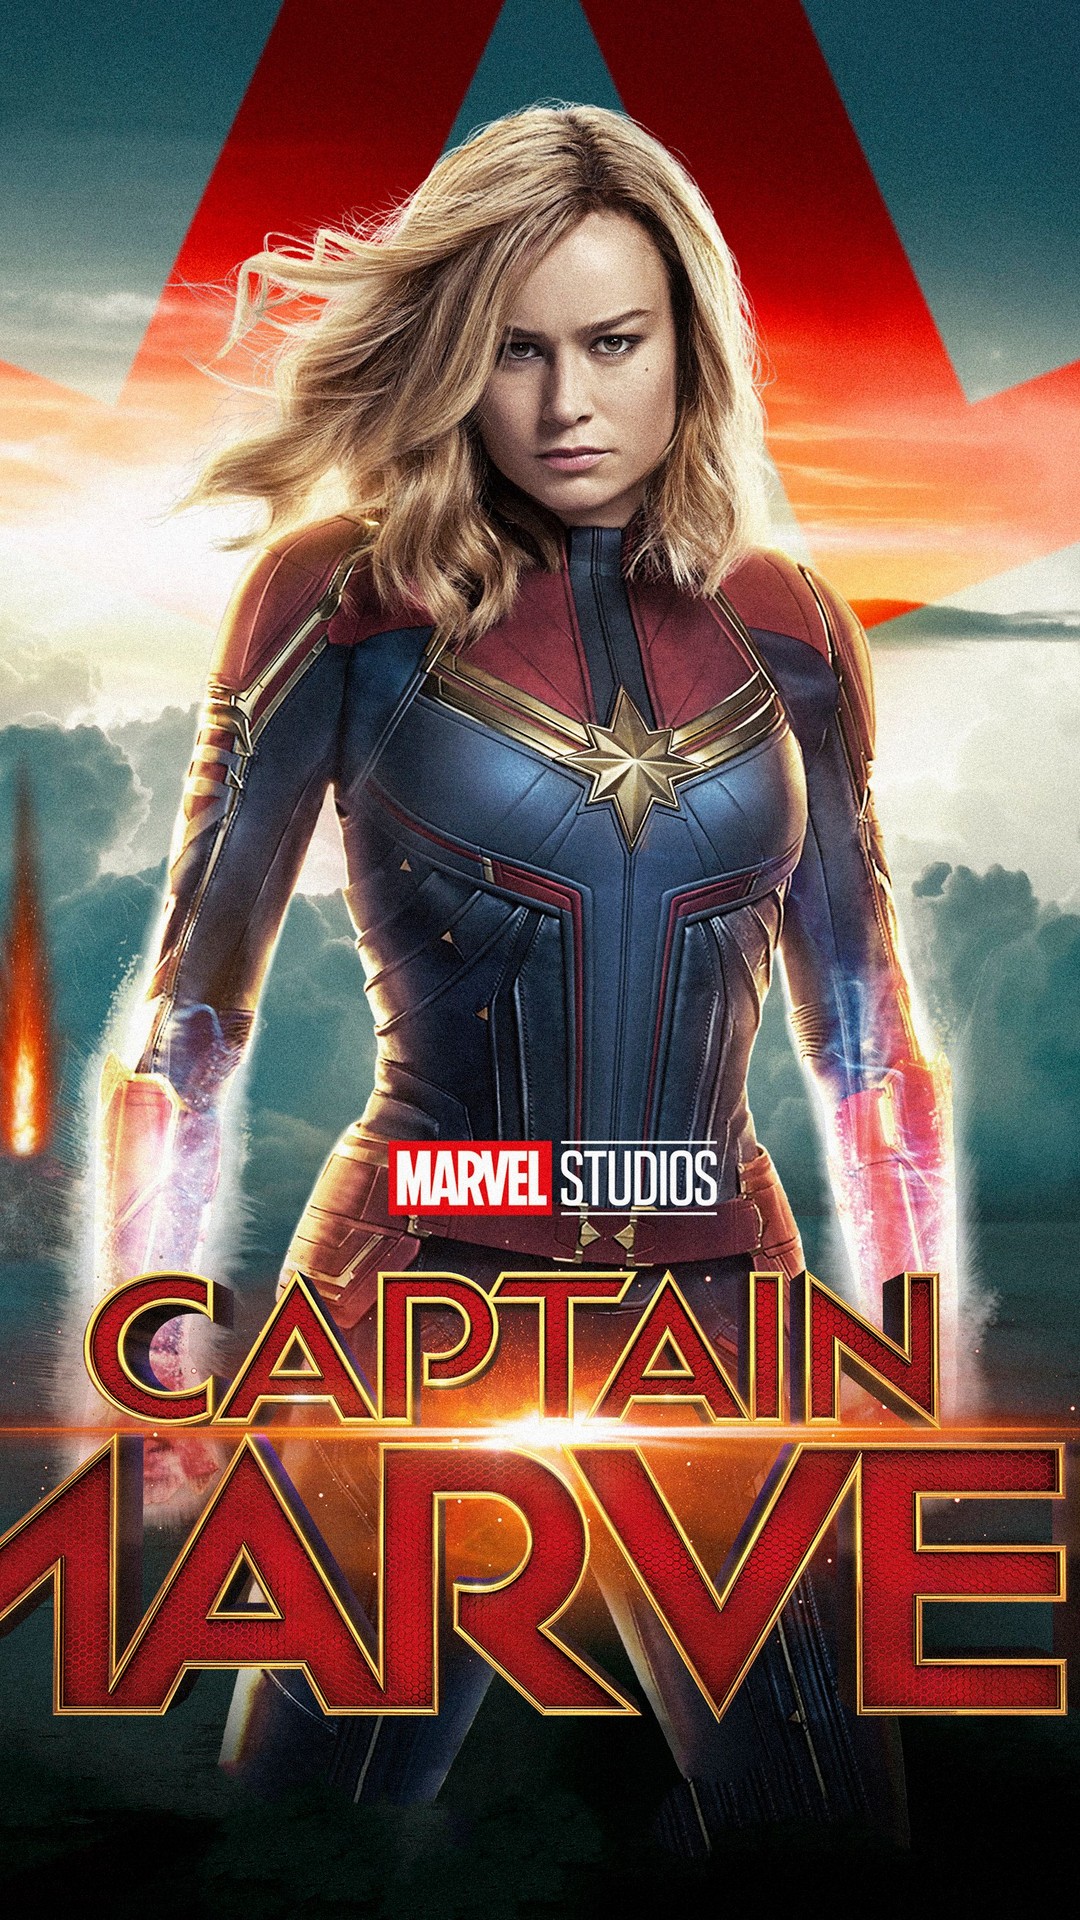 Captain Marvel Wallpaper For Mobile with high-resolution 1080x1920 pixel. You can use this poster wallpaper for your Desktop Computers, Mac Screensavers, Windows Backgrounds, iPhone Wallpapers, Tablet or Android Lock screen and another Mobile device